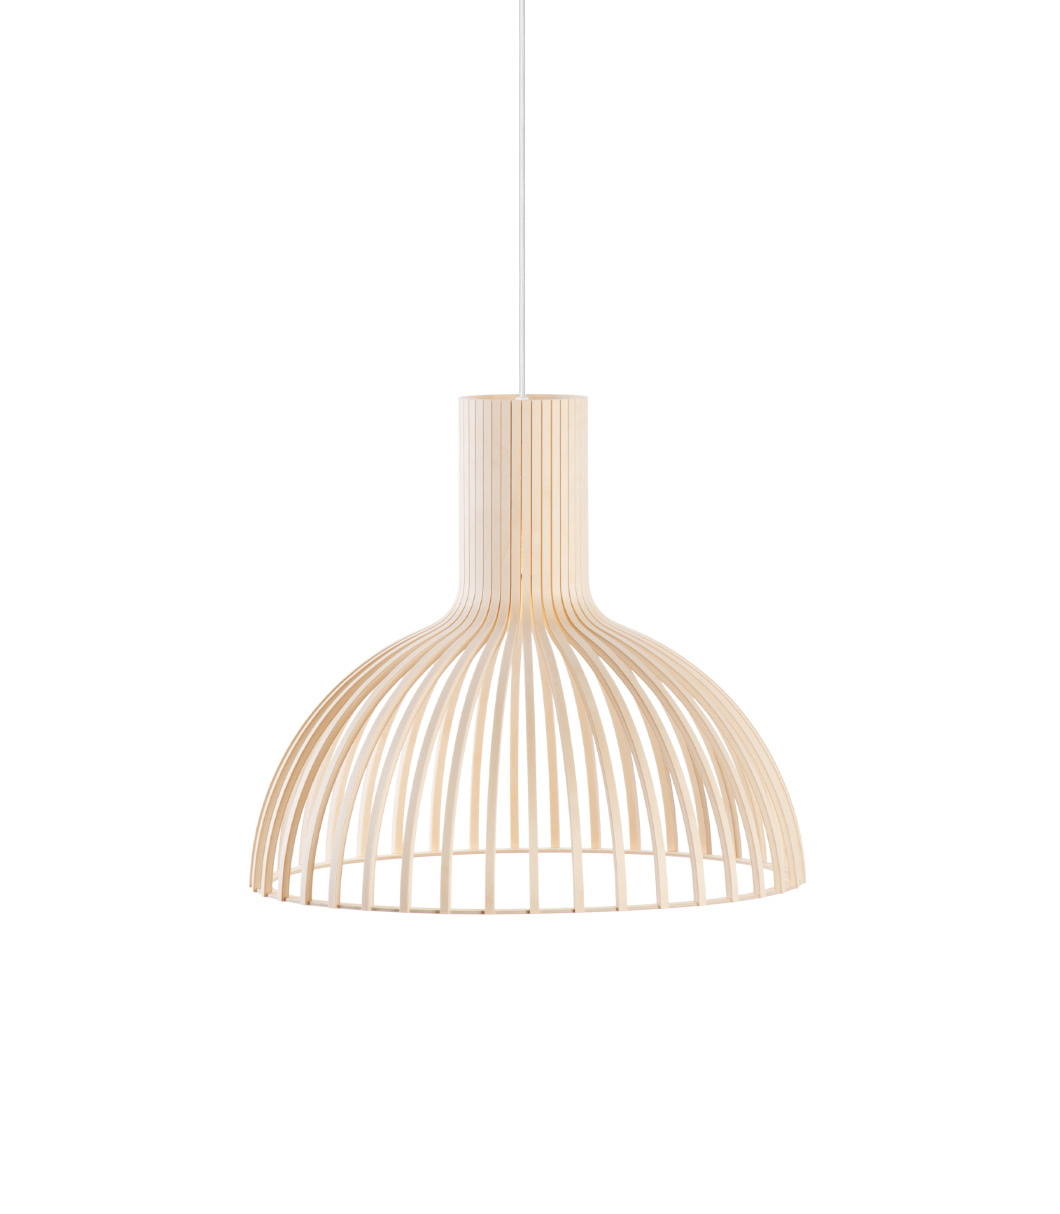 Victo Small 4251 pendant lamp  is available in natural birch